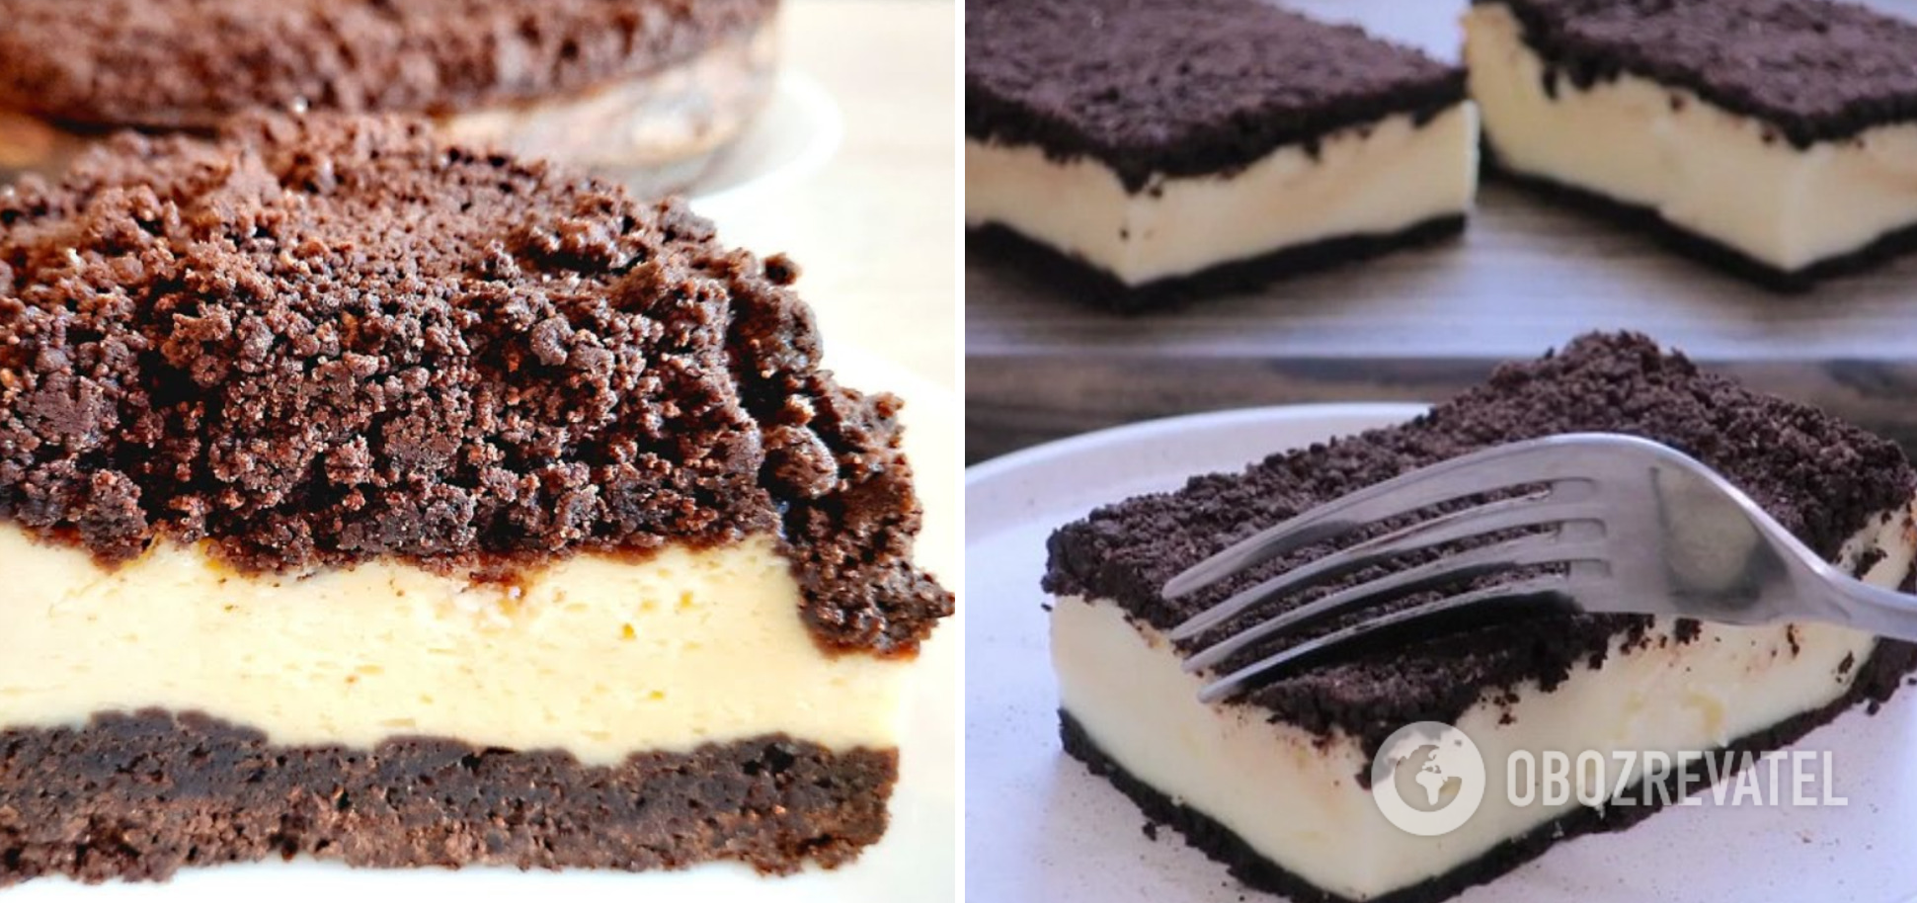 Chocolate cake with cheese